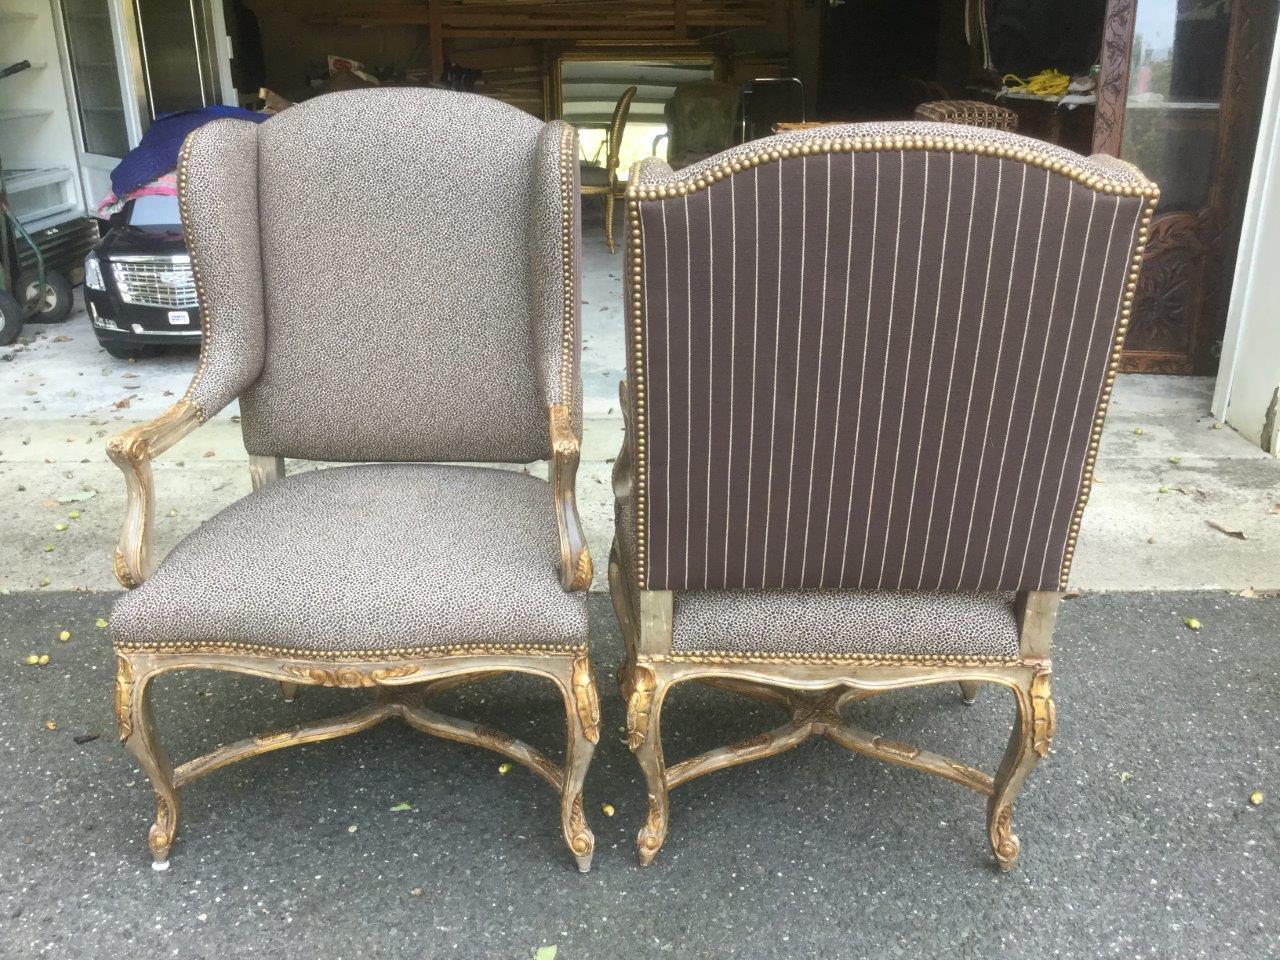 Glam Pair of Silver Painted French Wingback Chairs with Cheetah Upholstery In Good Condition For Sale In Hopewell, NJ